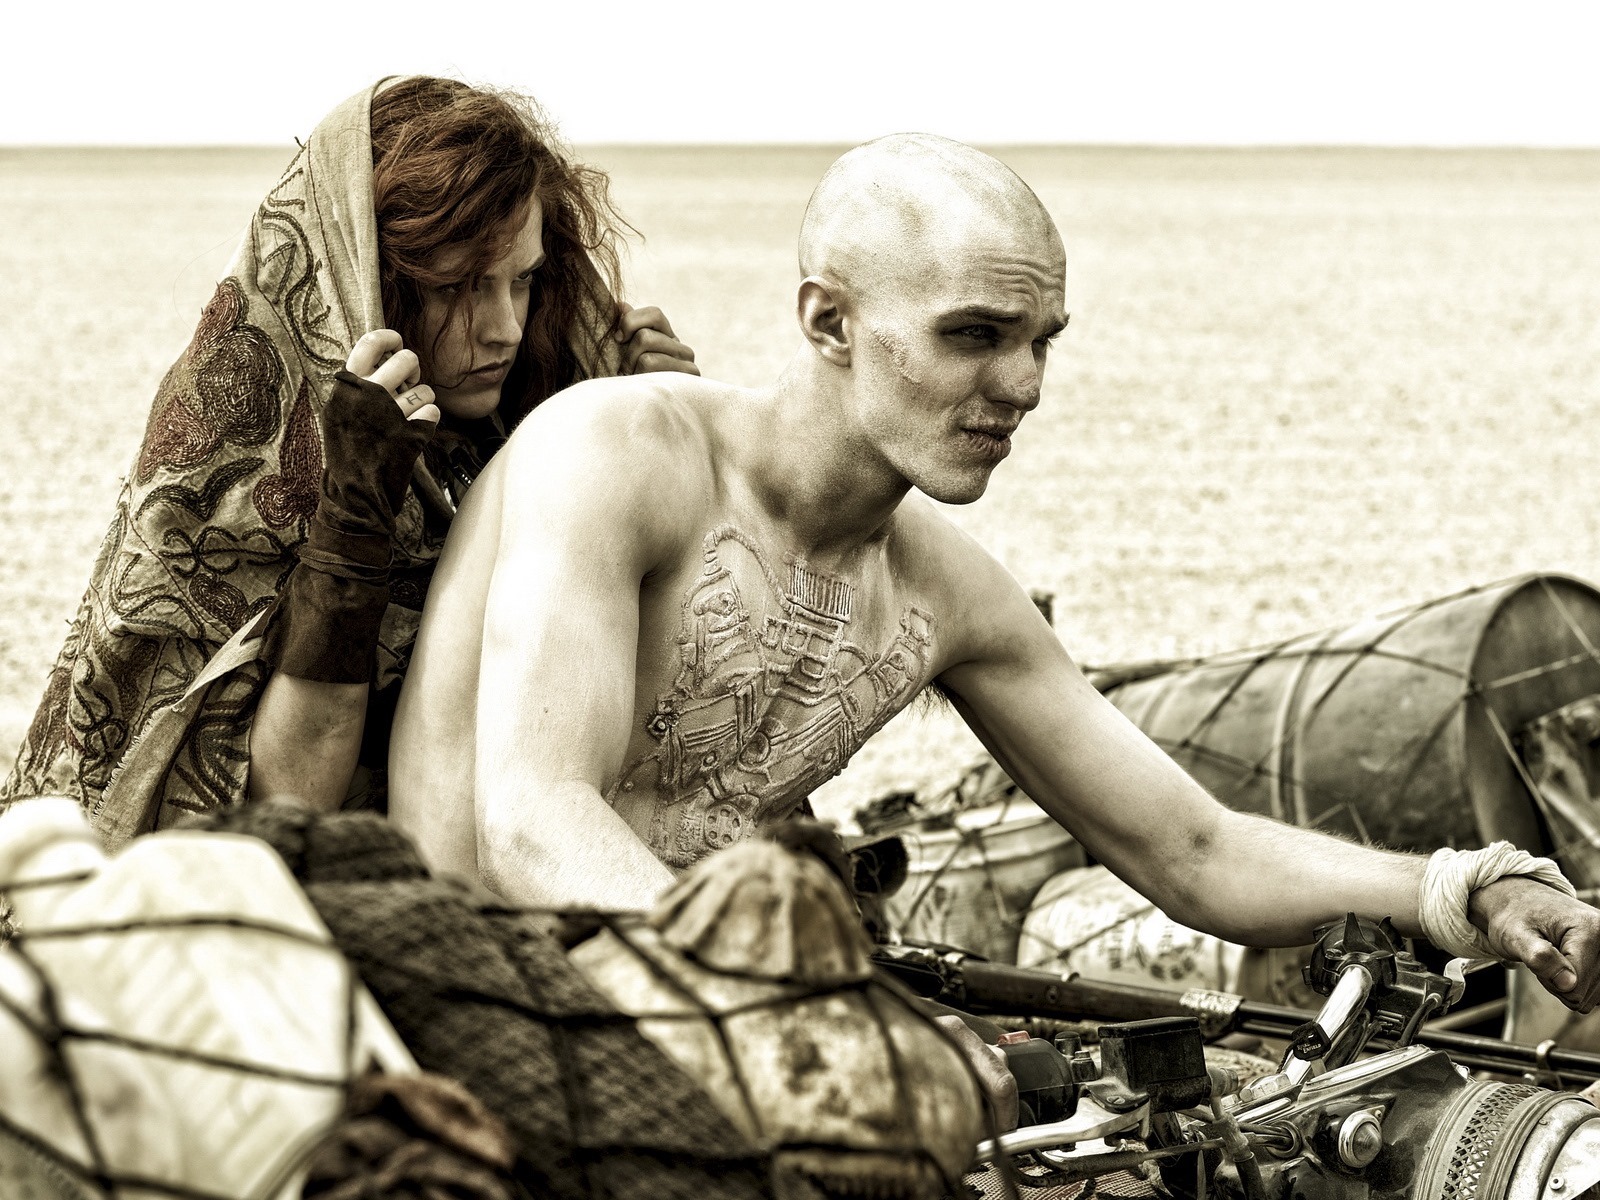 Mad Max: Fury Road, HD movie wallpapers #13 - 1600x1200